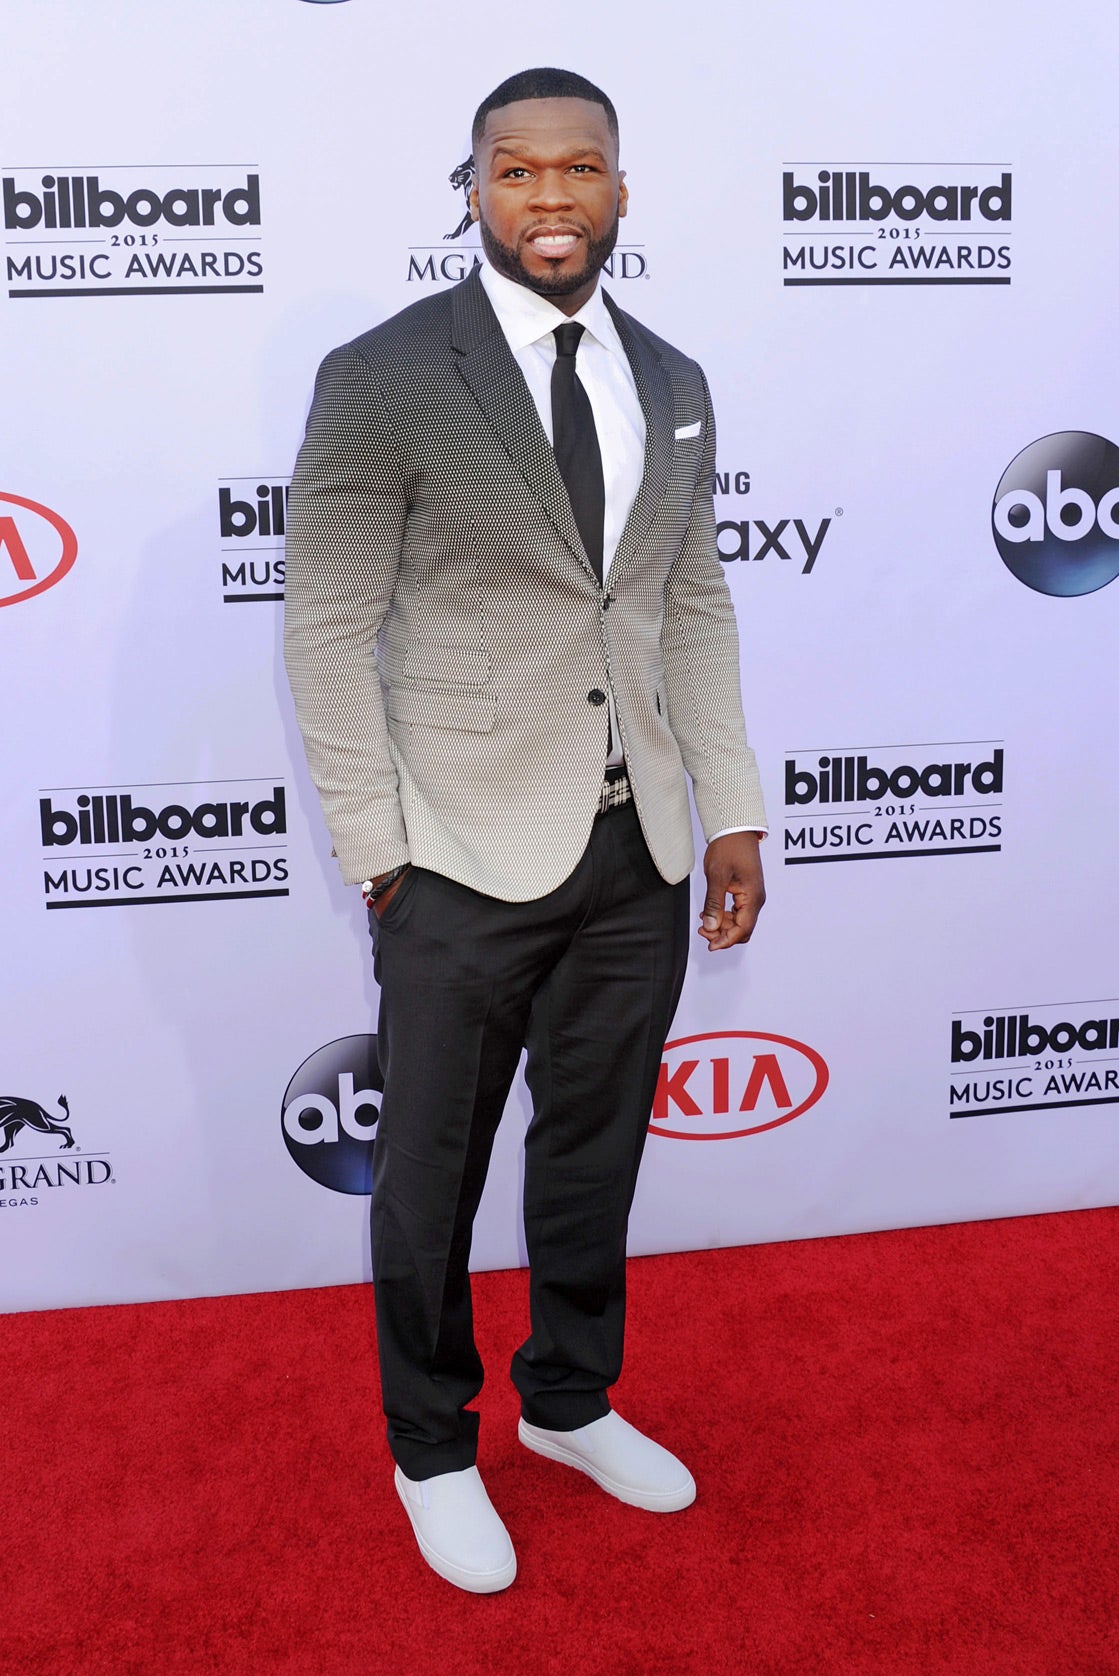 Check Out the Red Carpet from the 2015 Billboard Music Awards
